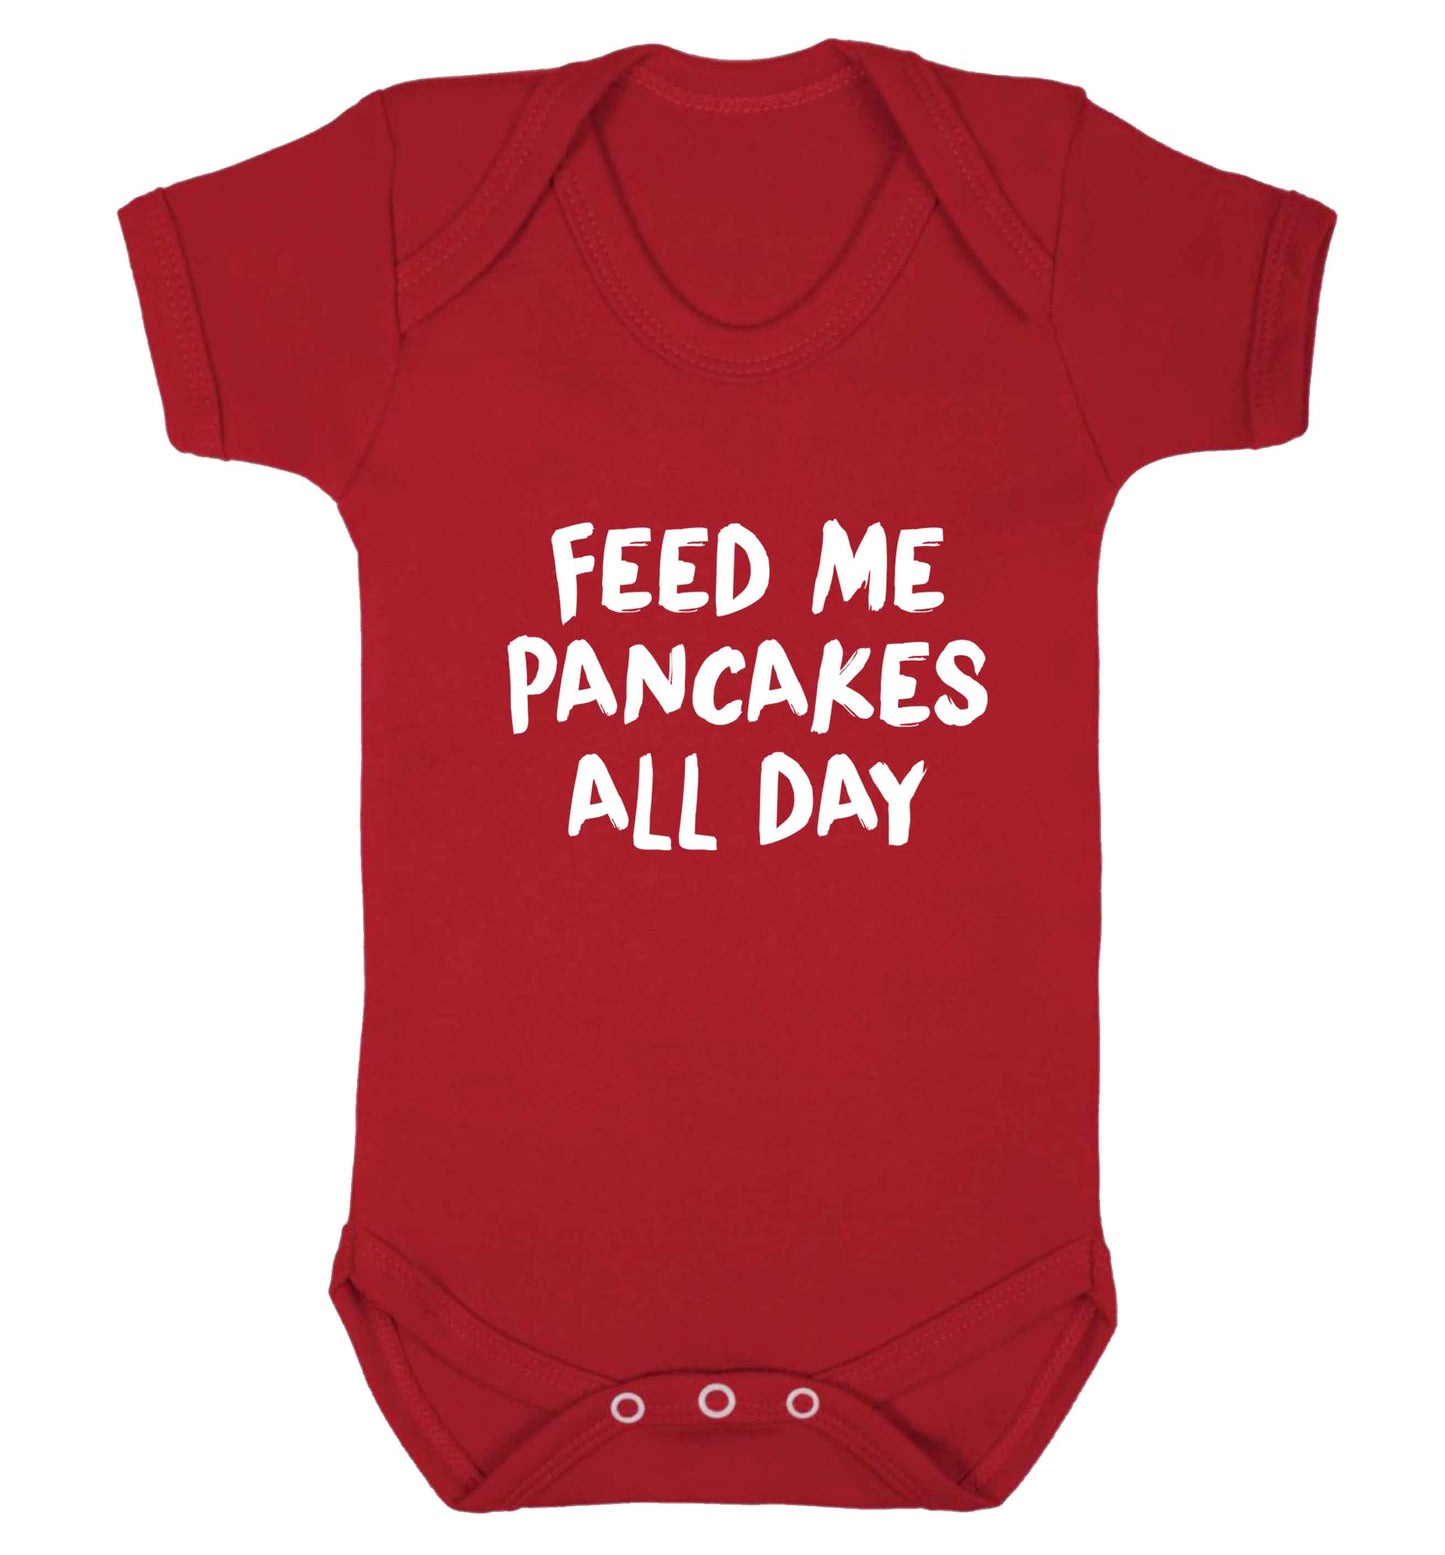 Feed me pancakes all day baby vest red 18-24 months